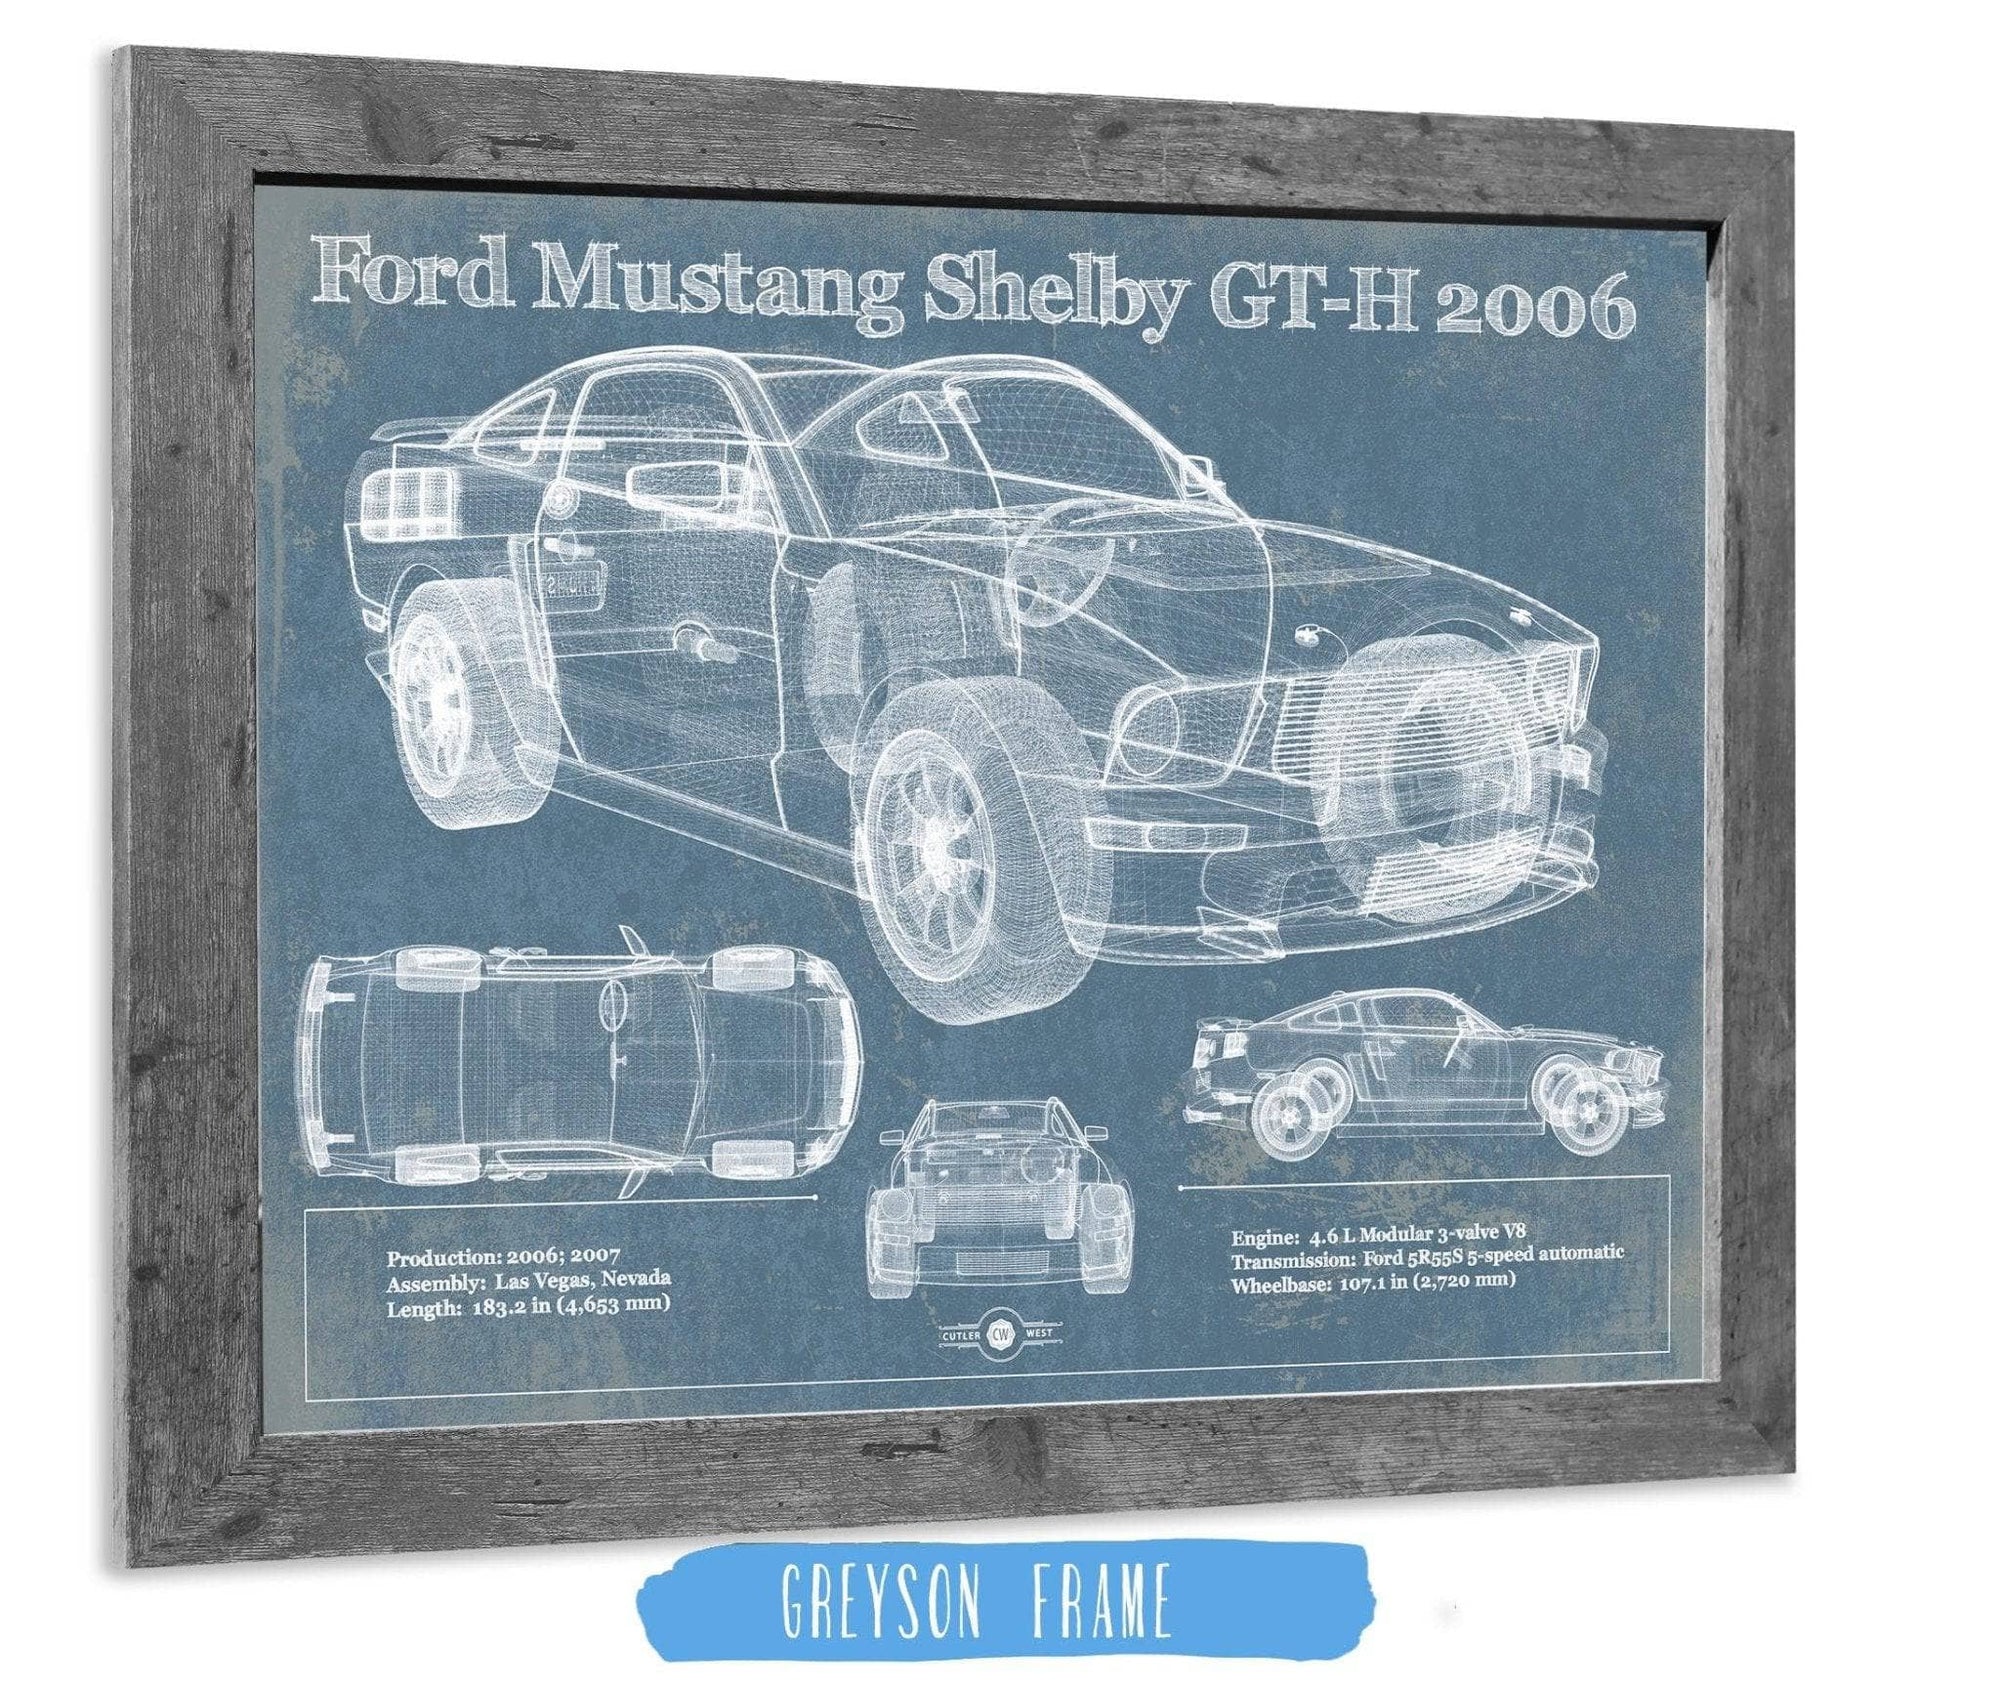 Cutler West Ford Collection 14" x 11" / Greyson Frame Ford Mustang Shelby GT-H 2006 Original Blueprint Art 923598517_13197